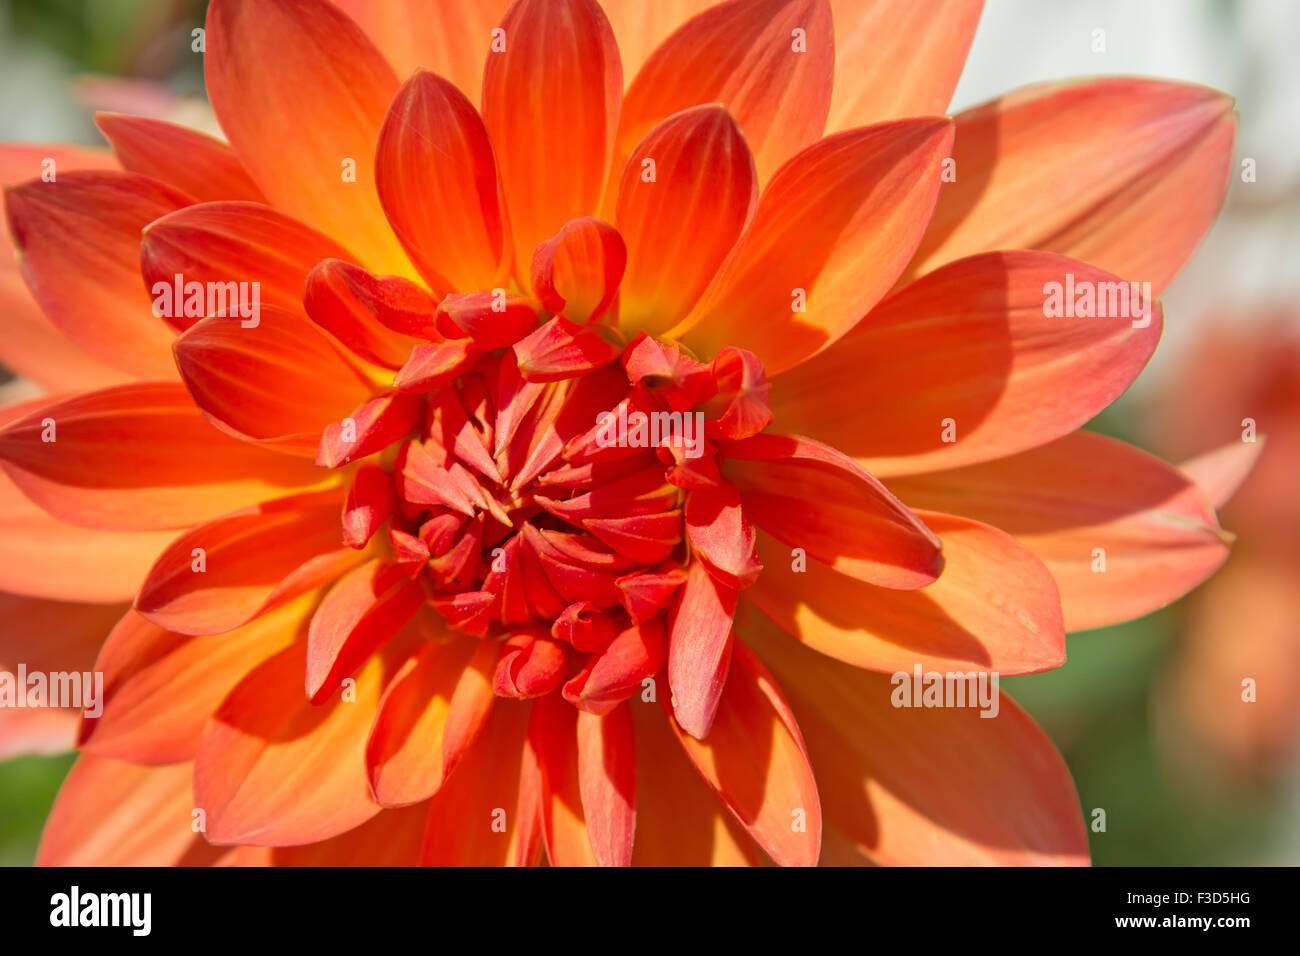 Colorful dahlia flower with morning dew drops Stock Photo